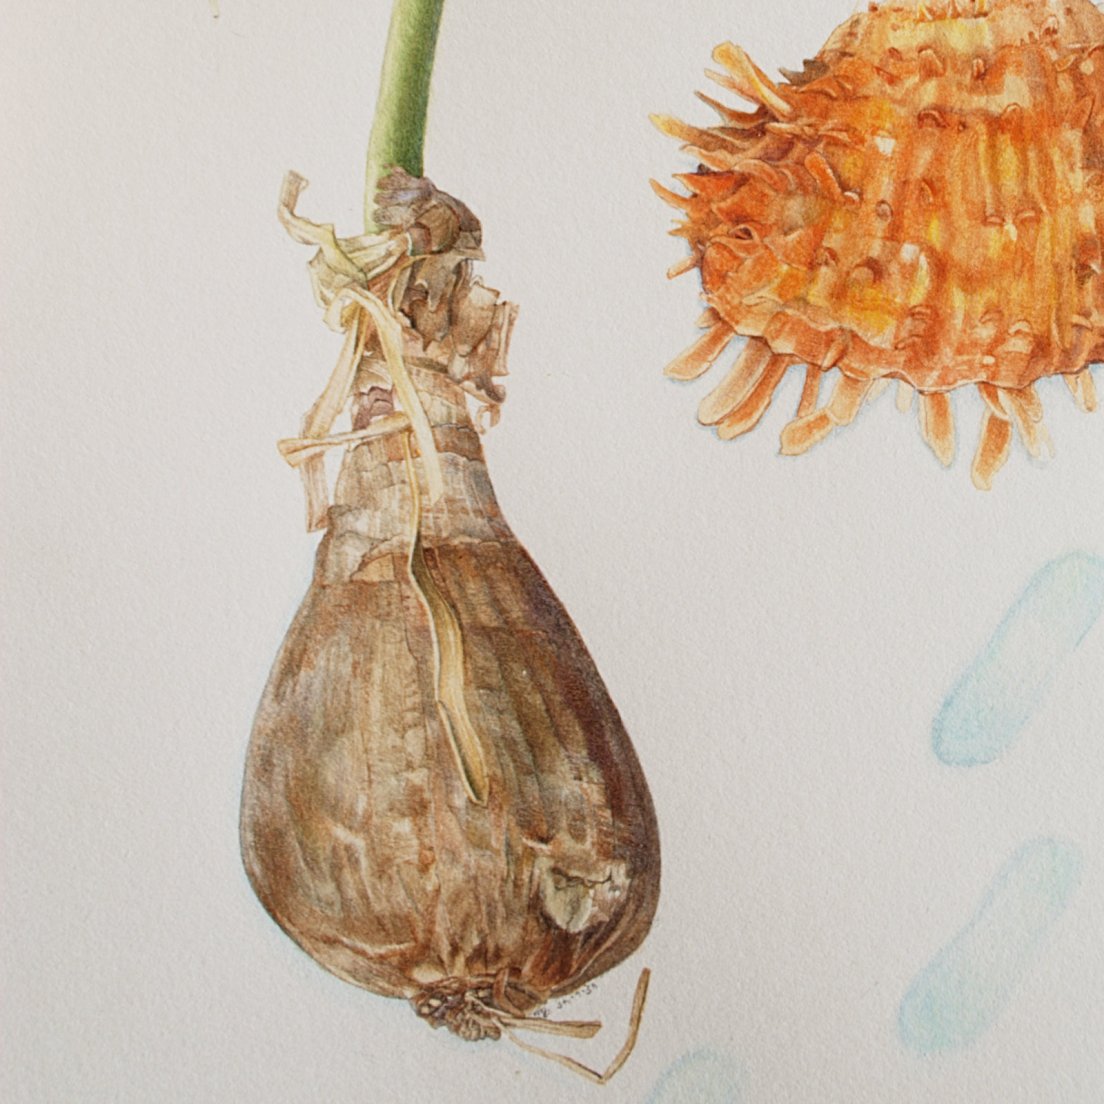 Closeup 3 of Herbier Grec, a watercolour painting by messalyn featuring nature elements such as an orange seashell (spondylus barbatus), a white flower (a sea daffodil aka pancratium maritimum), a yellow feather, along with a selkie skin, victorian/edwardian underwear, a lyre and a greek vase, against a background of sea and foam